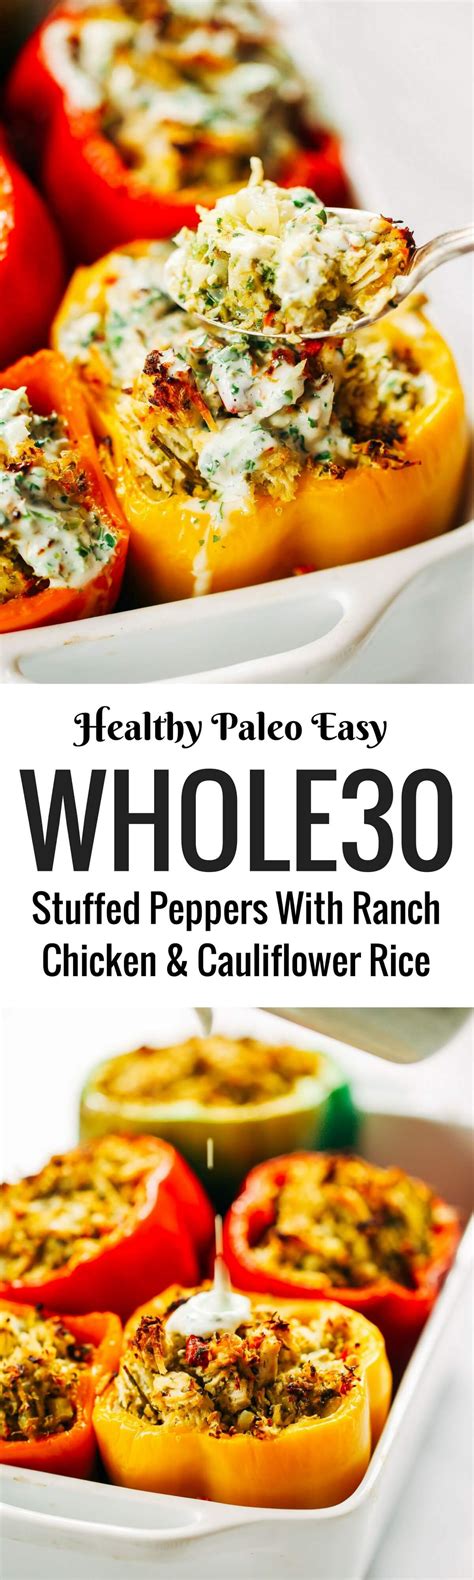 Highlands ranch quickly grew in population to today's 100,000 or so residents. Chicken Ranch Paleo Whole30 Stuffed Peppers - Paleo Gluten ...